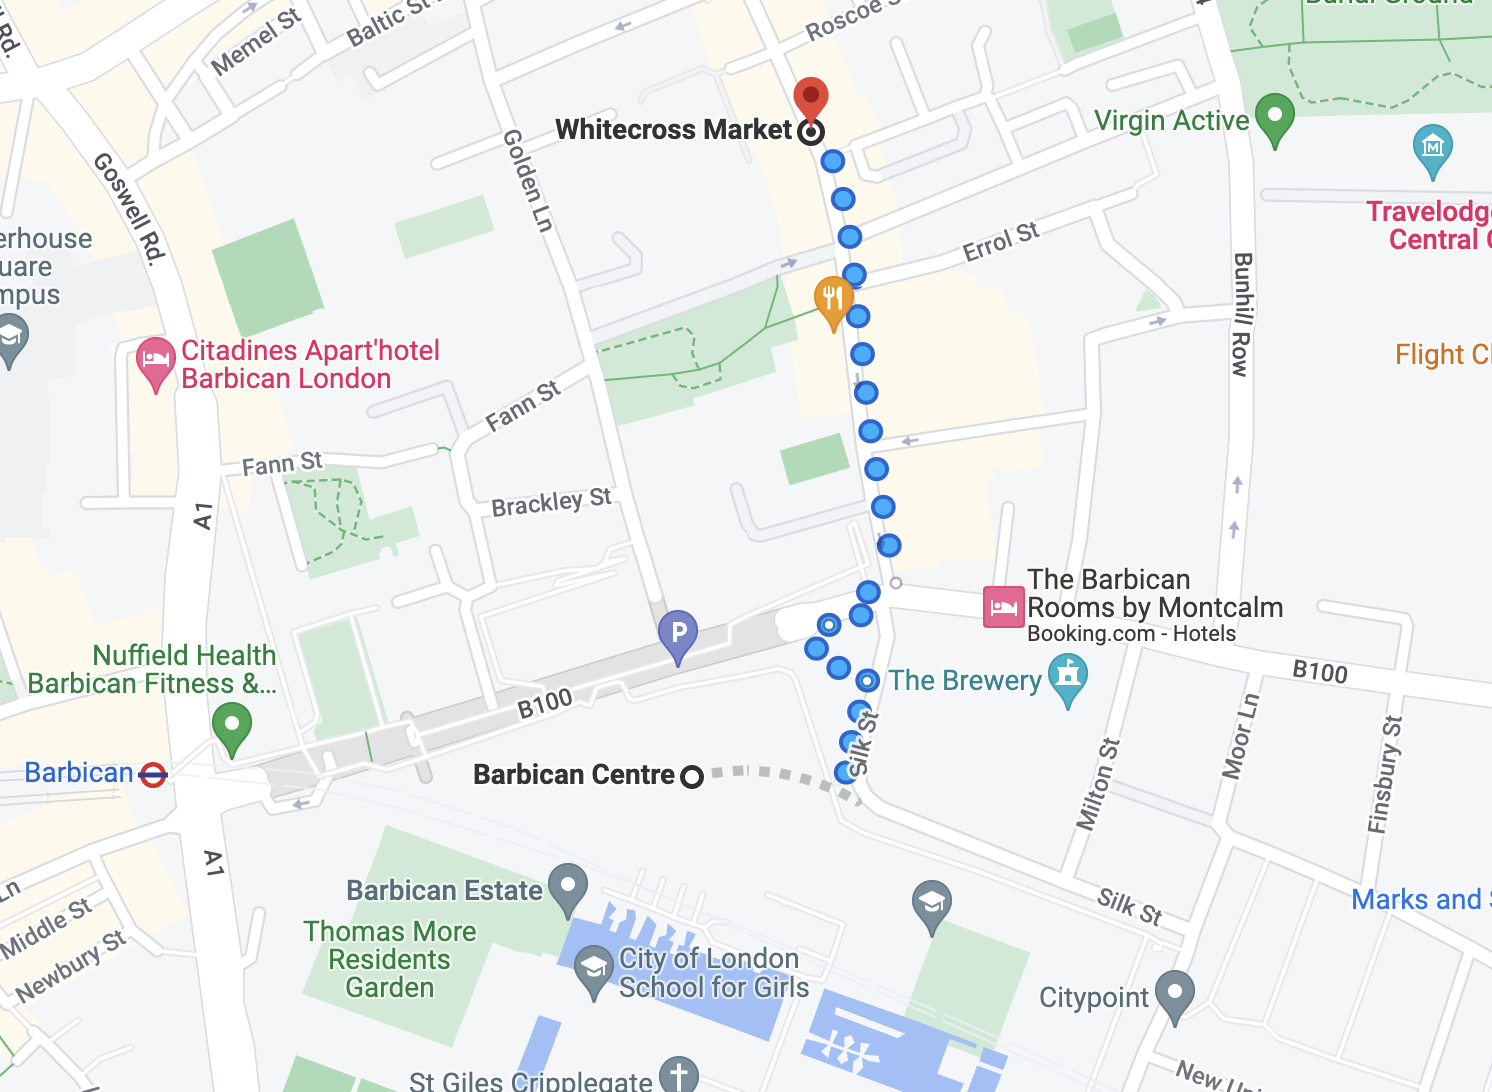 Google maps directions from Barbican Centre to Whitecross Market